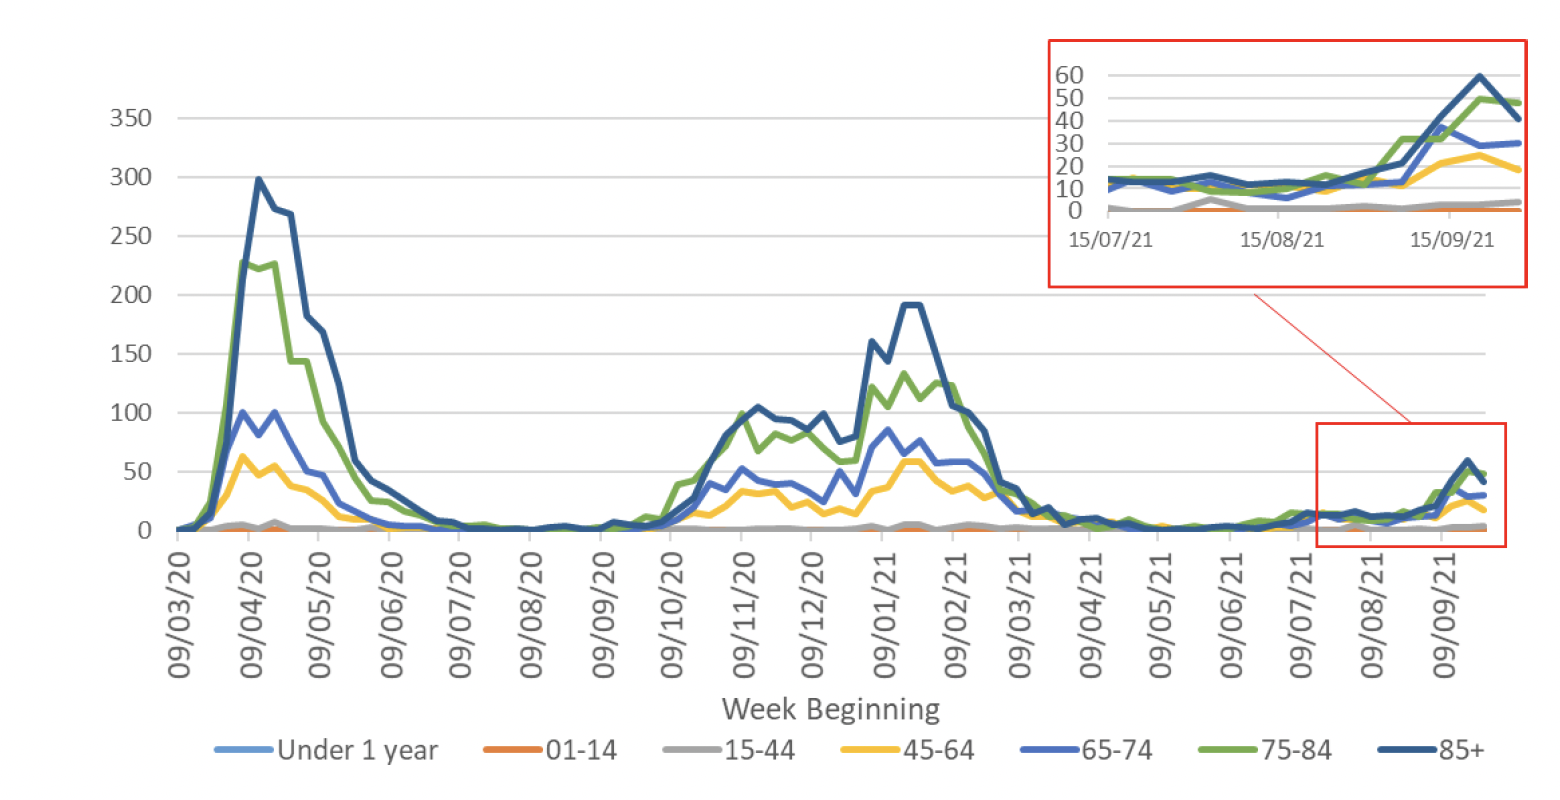 This line graph shows the weekly number of deaths for seven different age groups over time, from March 2020. In April 2020 the number of deaths in the four age groups over 45 reached a peak, with the highest number of deaths being in the over 85 age group. Deaths then declined steeply and the number of deaths was very low in all age groups from July to September 2020. In October the number of deaths started to increase and then plateaued during November and December 2020 for the four age groups over 45. At the end of December deaths rose steeply again to another peak in January 2021, with the highest deaths being in the over 85 age group. The number of deaths has since declined steeply with the largest decrease in the over 85 age group, followed by a sharp decline in the 75 to 84 age group. Since mid-June 2021 there has been a slight increase in deaths overall, with the greatest increase in the 45 plus age groups. However, the number of deaths in all age groups remained low with only a slight recent increase seen with 141 deaths registered over the latest week. Deaths in the under 44 age groups have remained very low throughout the whole period.